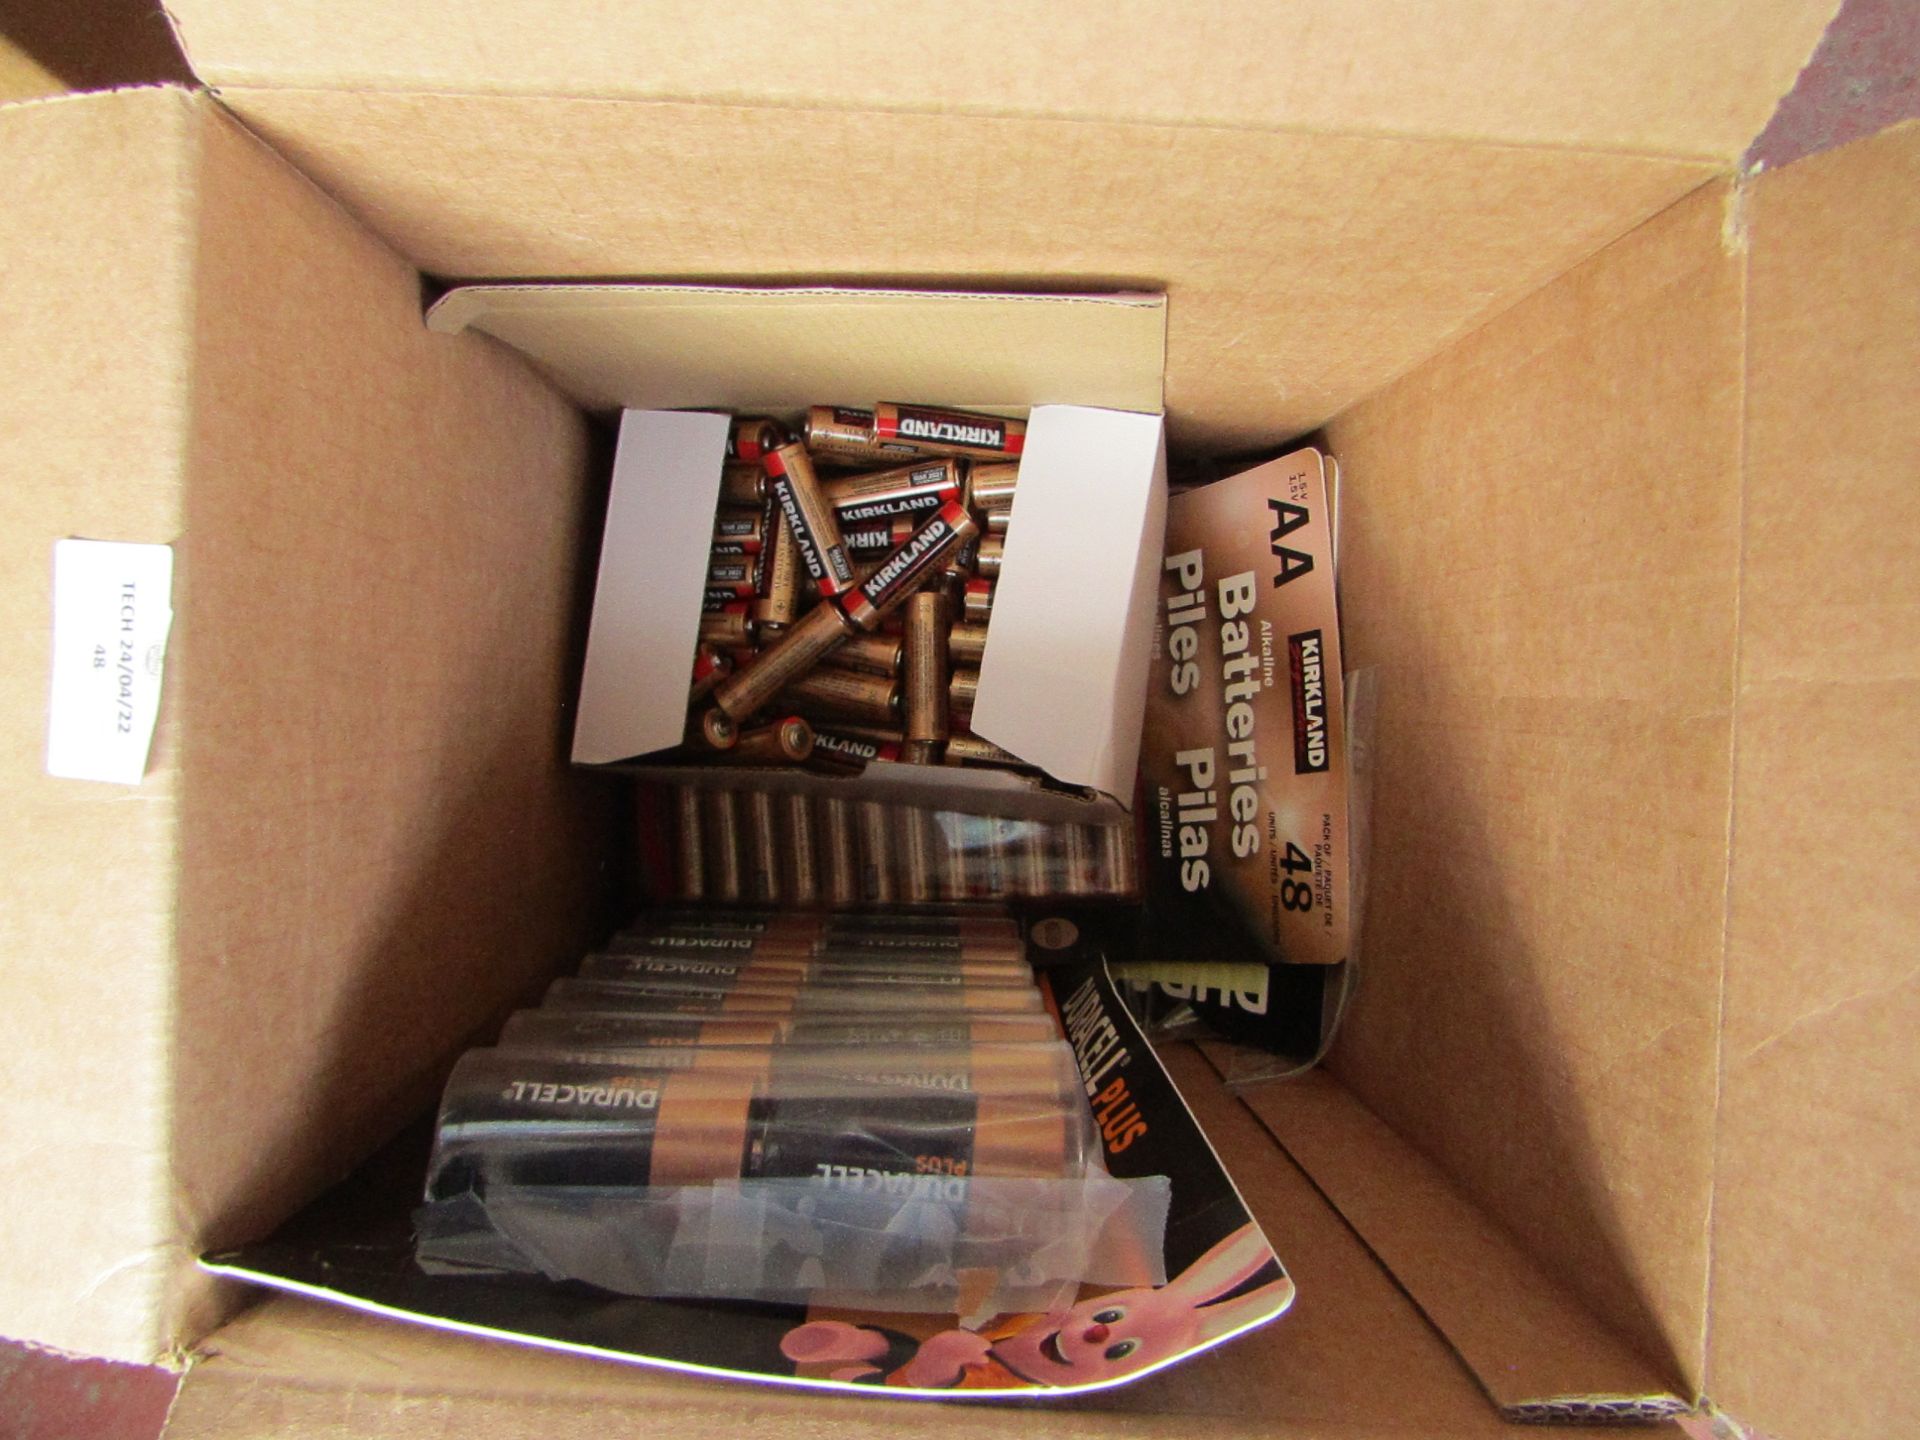 1x Box Containing Various Sets Of Batteries - AA / D14 / AAA Etc - Loose Out Of Original Packaging.